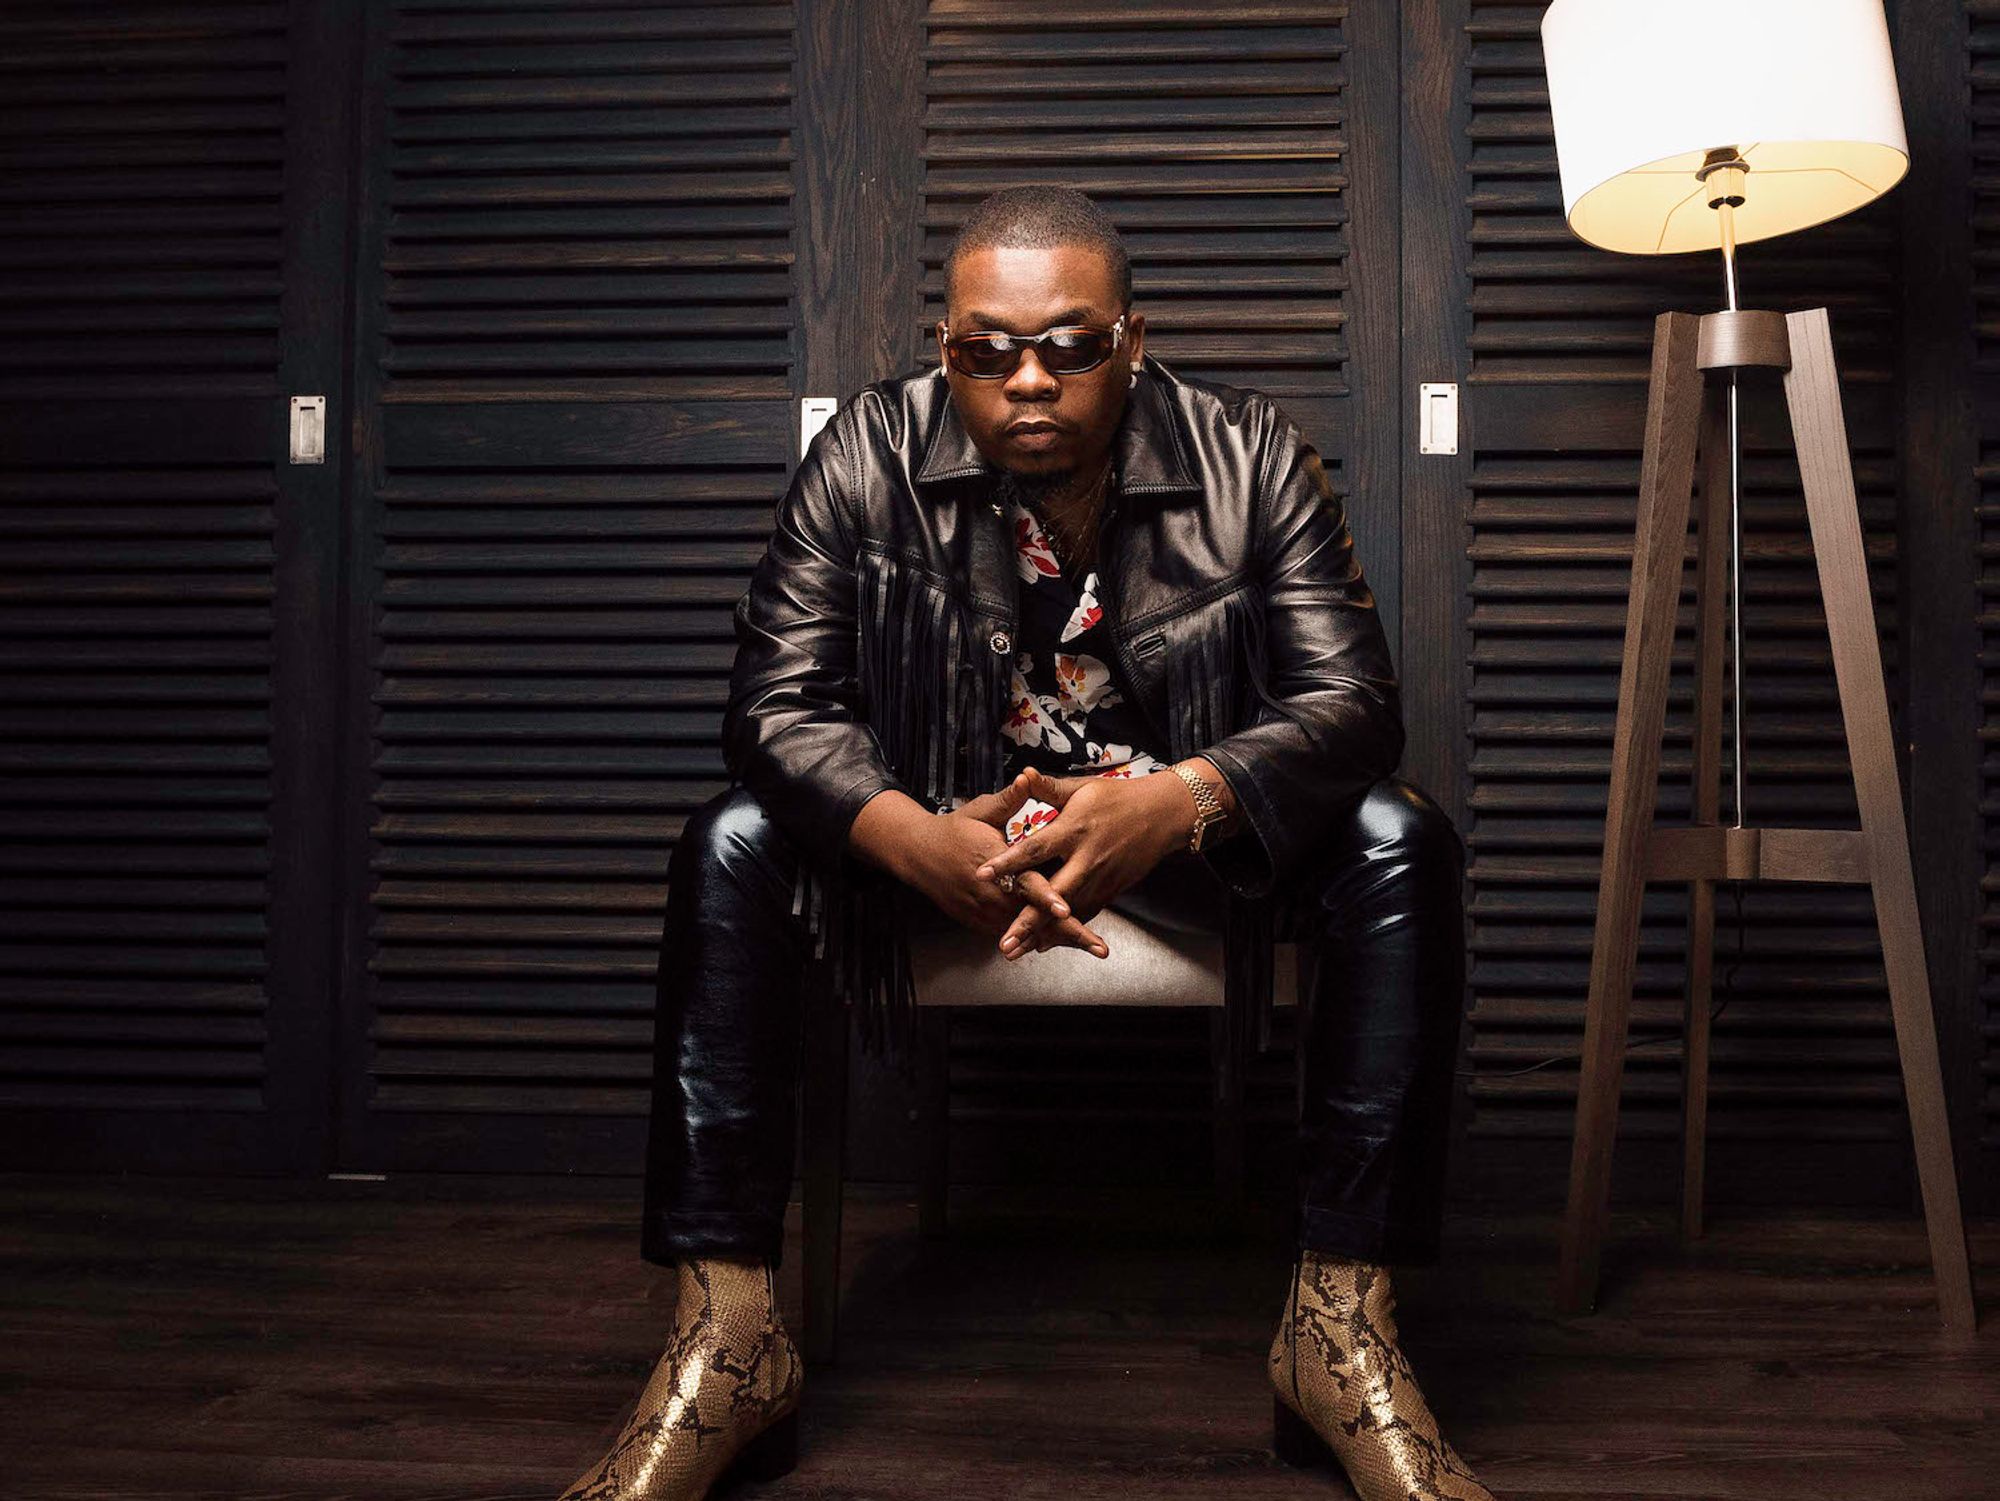 Interview: 'Carpe Diem' Is Olamide's New Way of Life